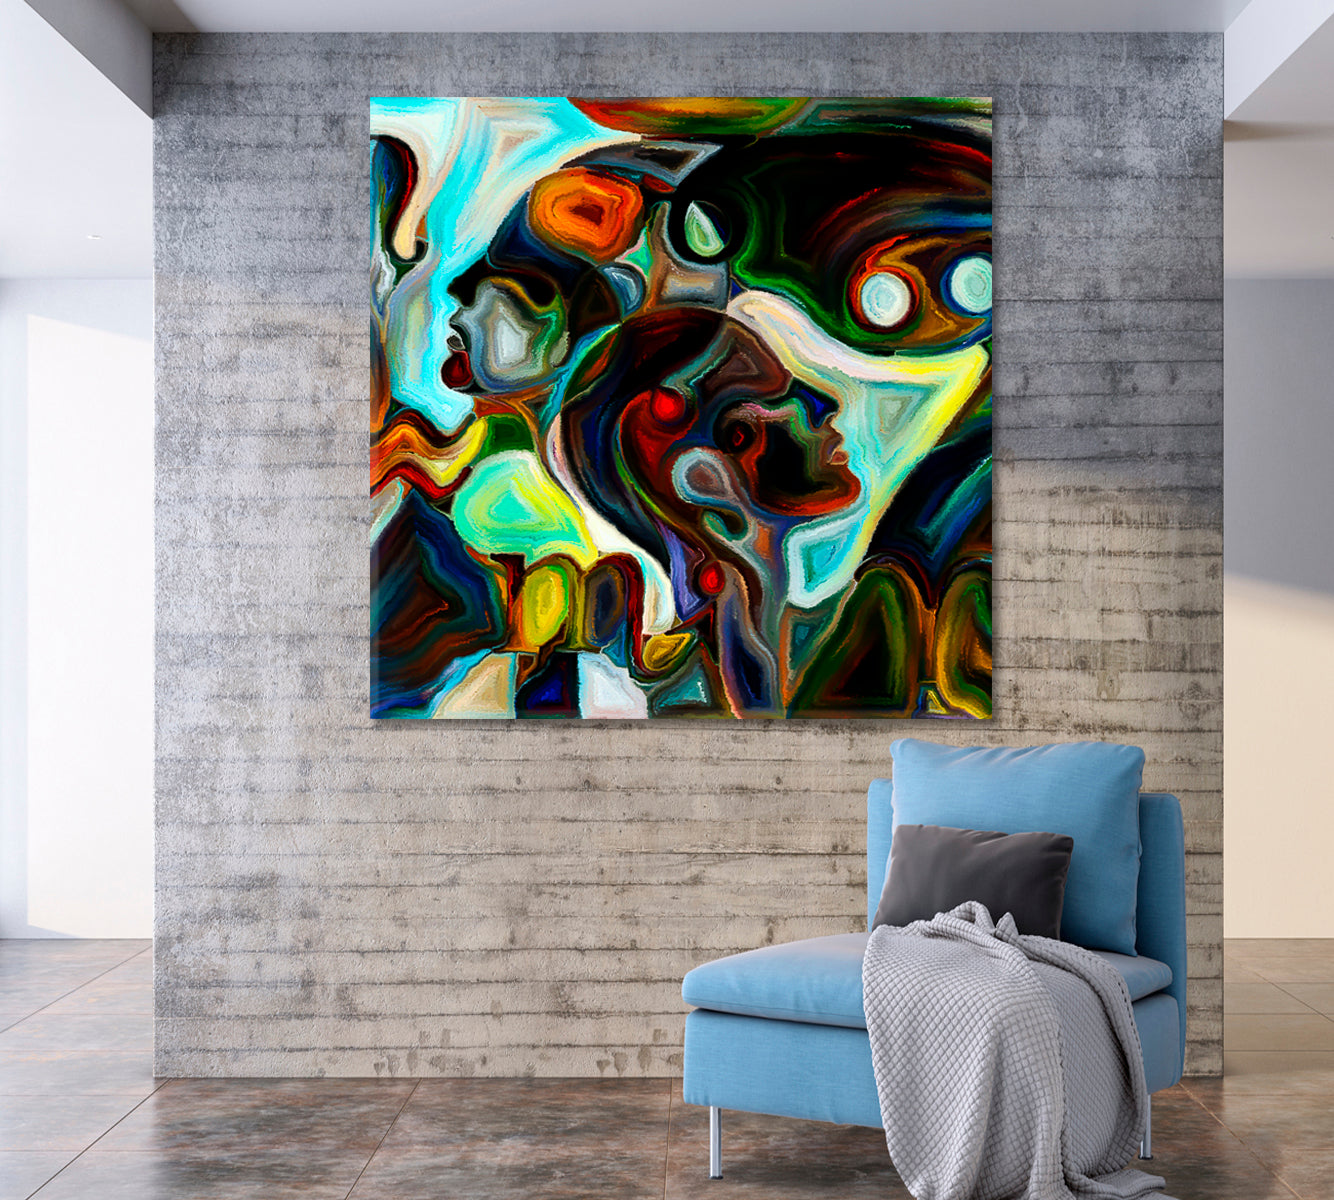 Human Symbols and Color Patterns Square Panel Consciousness Art Artesty   